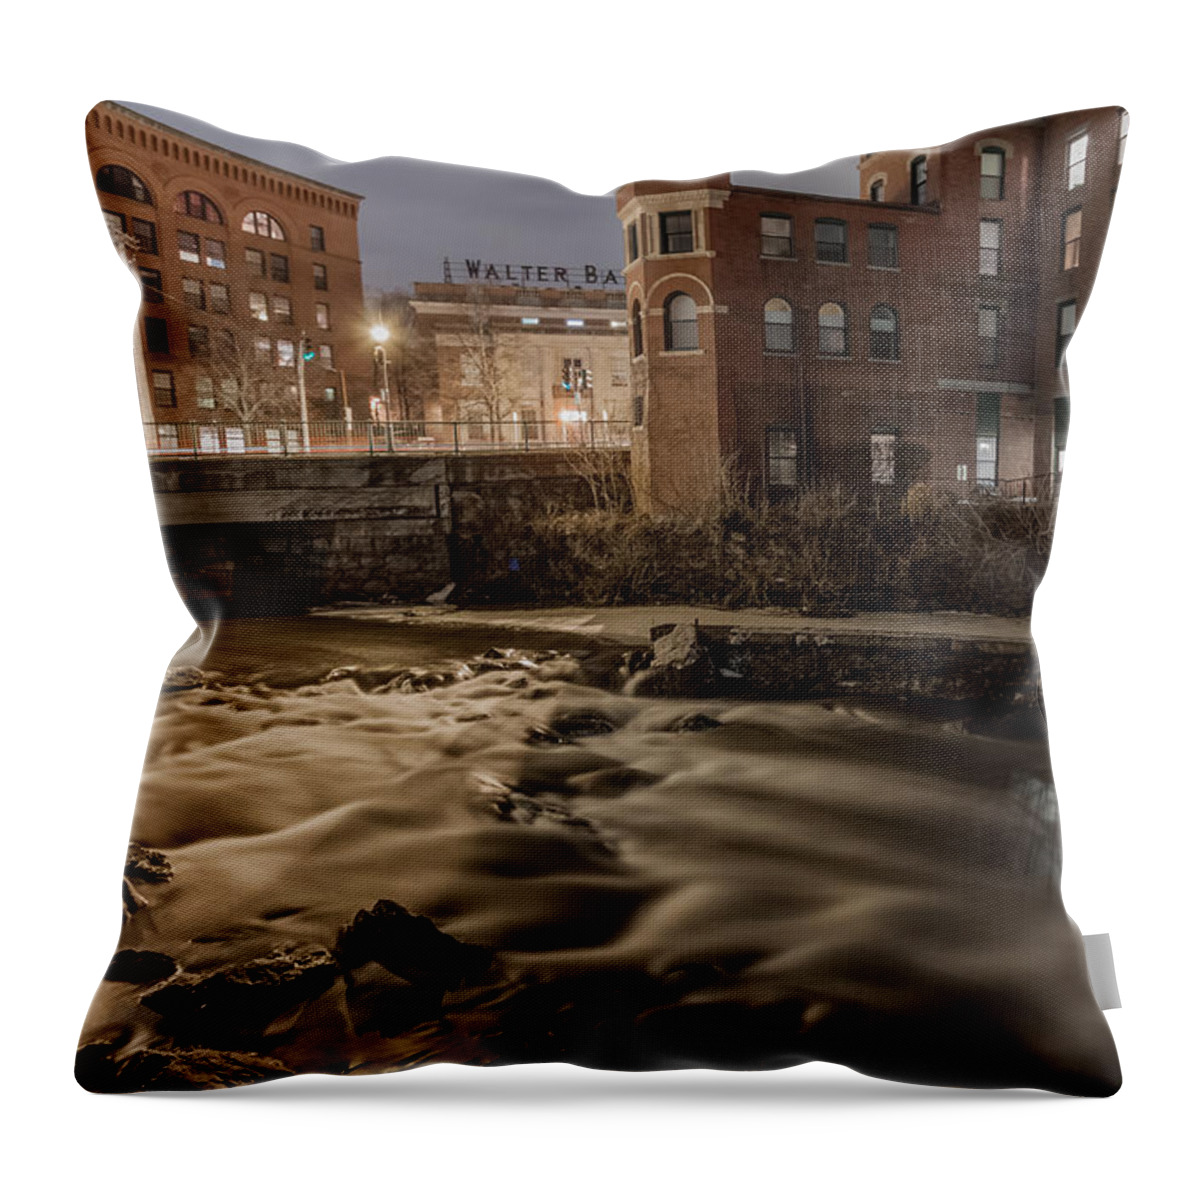 Boston Throw Pillow featuring the photograph Walter Baker Chocolate Factory by Brian MacLean